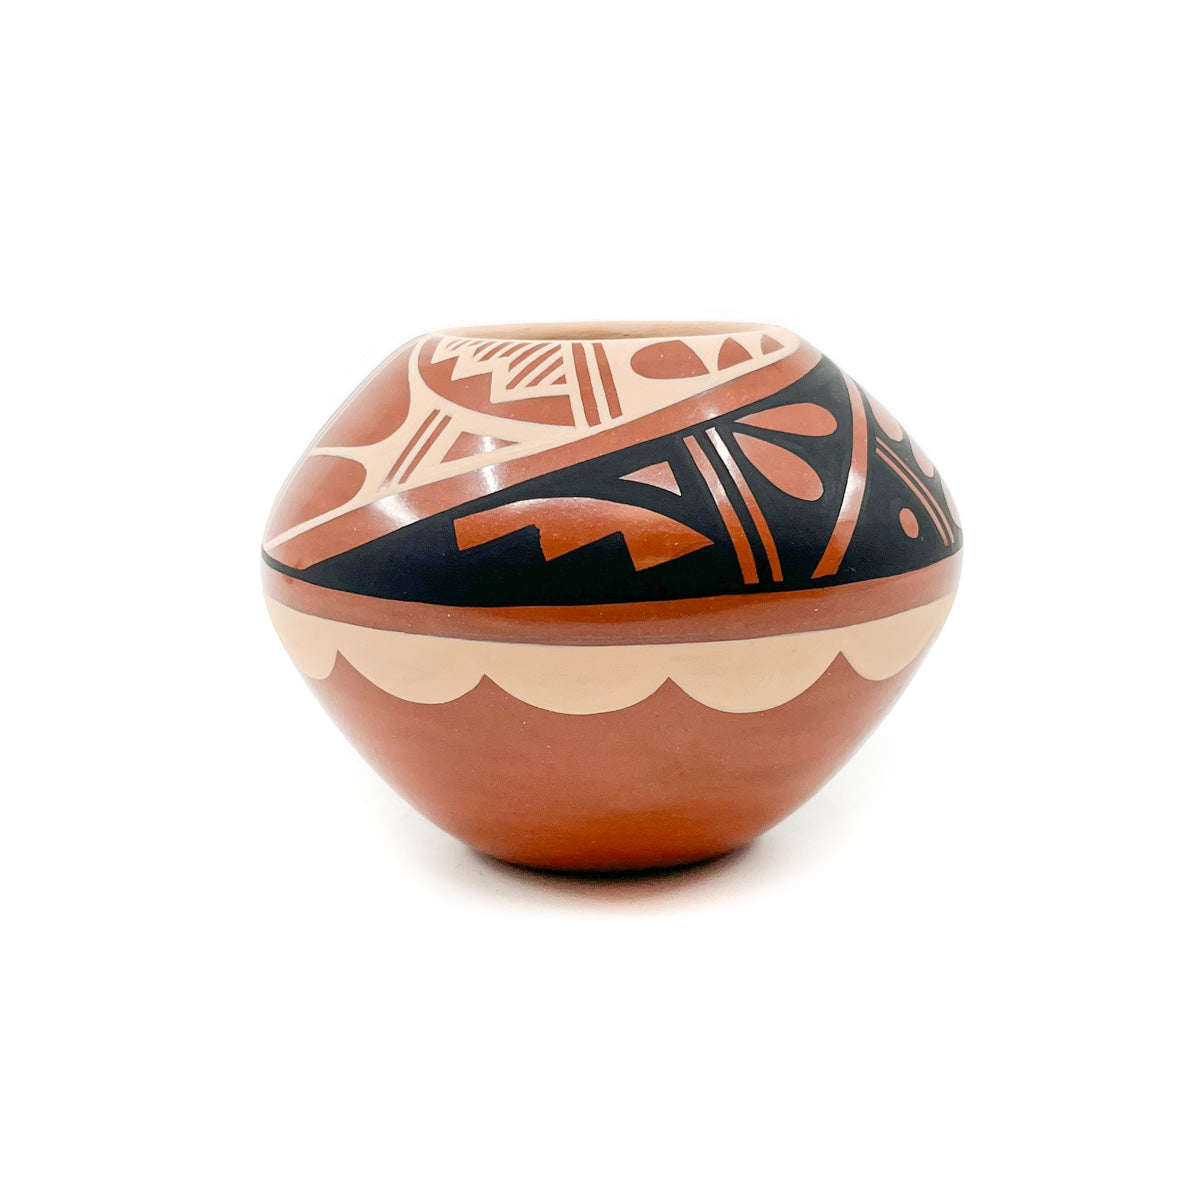 Polychrome Seed Pot by C. G. Loretto